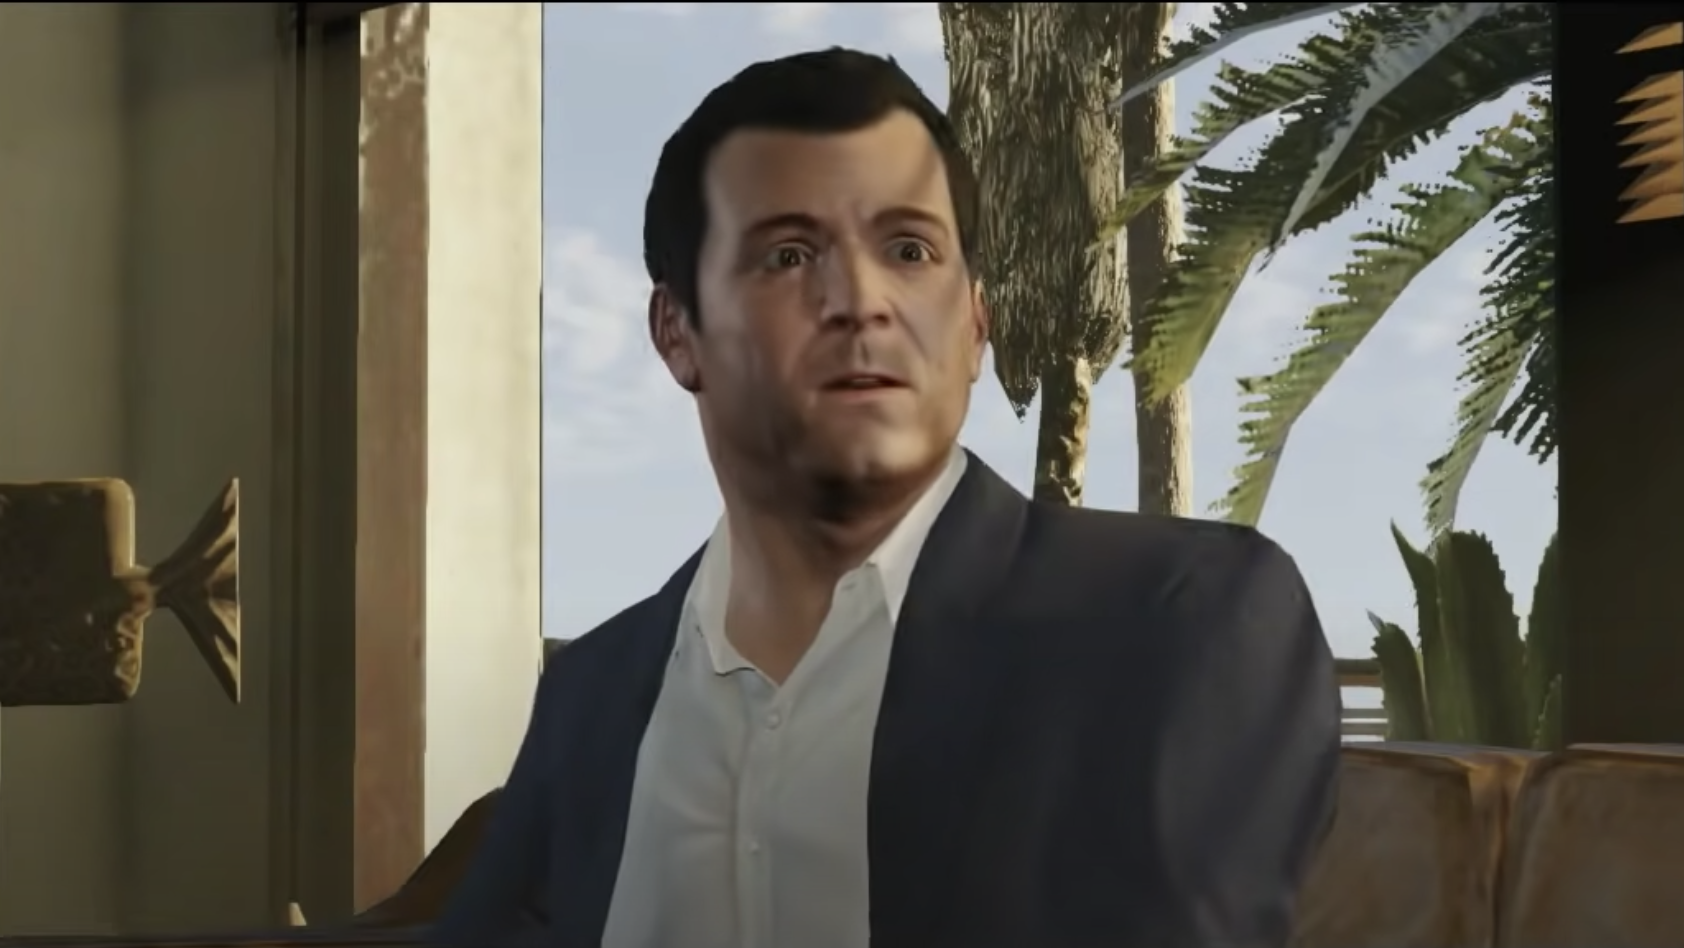 GTA 6 is not being made by the same Rockstar that made GTA 5